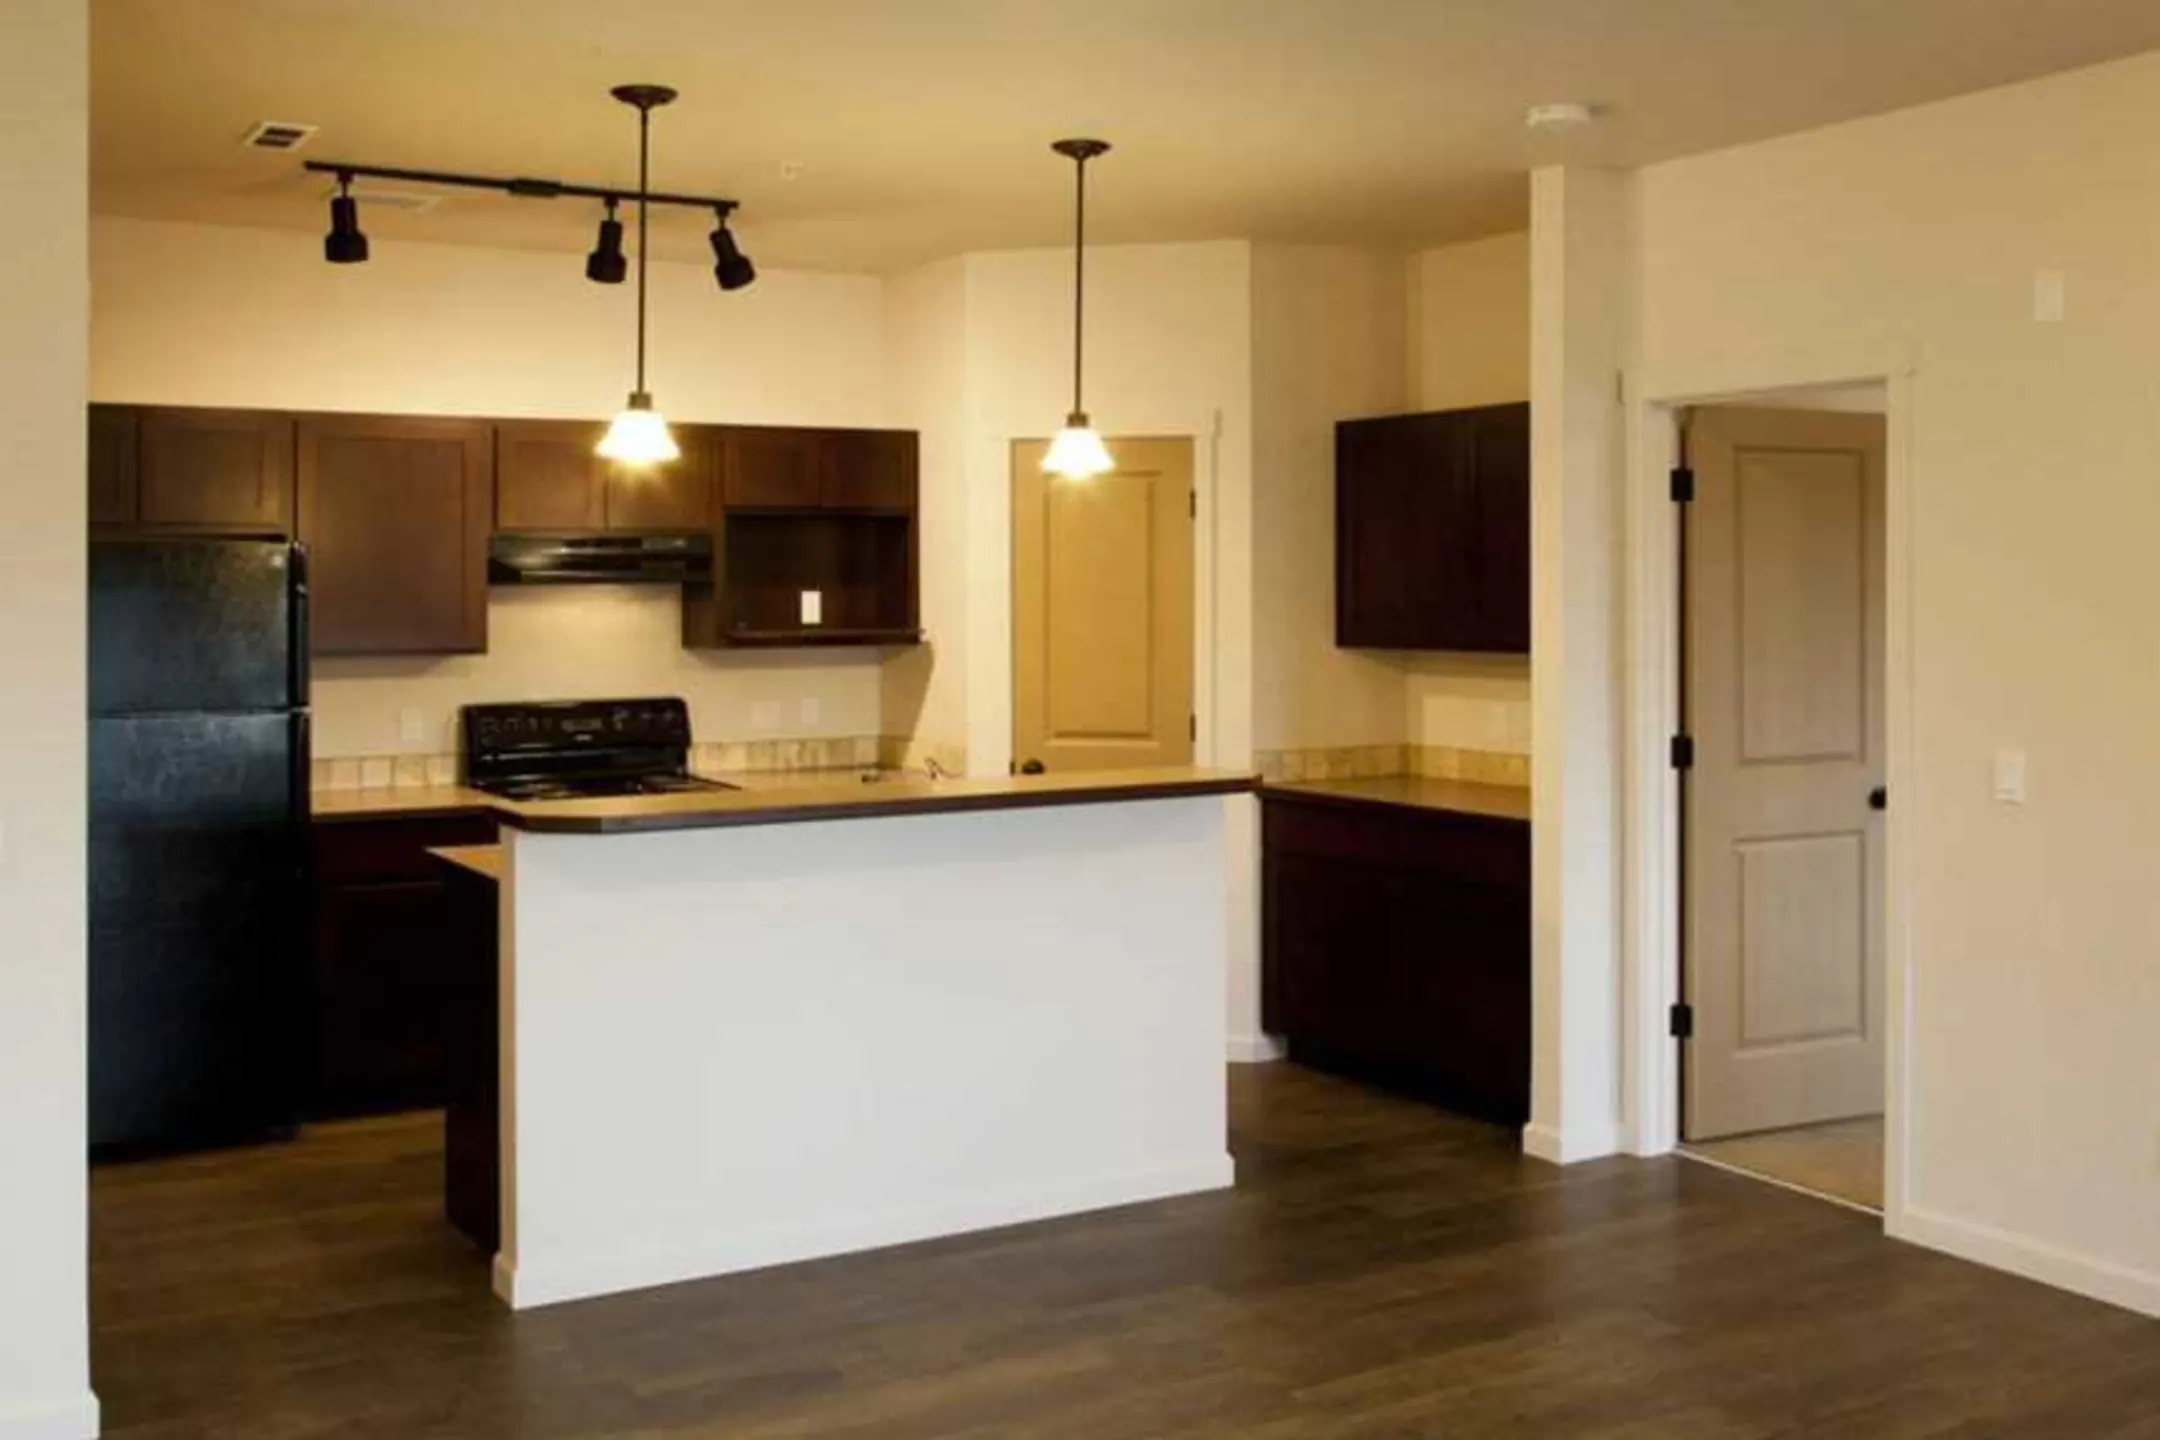 Kitchen - The Residence at Mill River - Coeur D Alene, ID